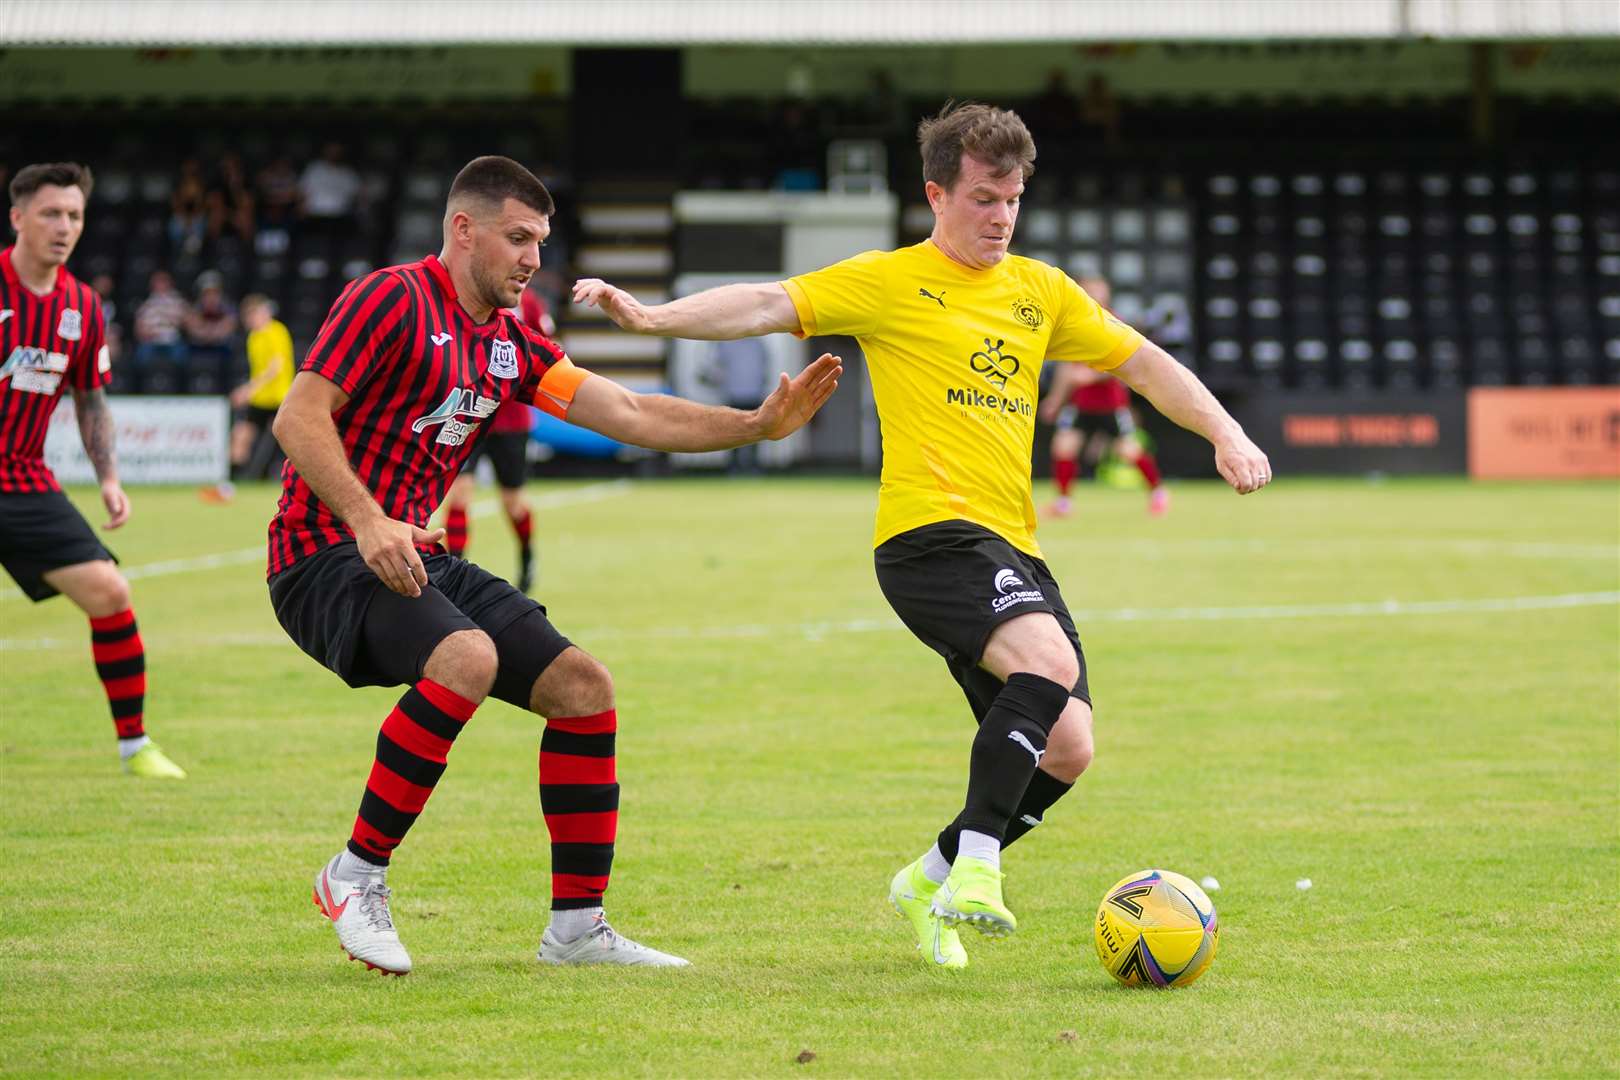 Conor Gethins is closing in on 200 goals for Nairn County. Picture: Daniel Forsyth